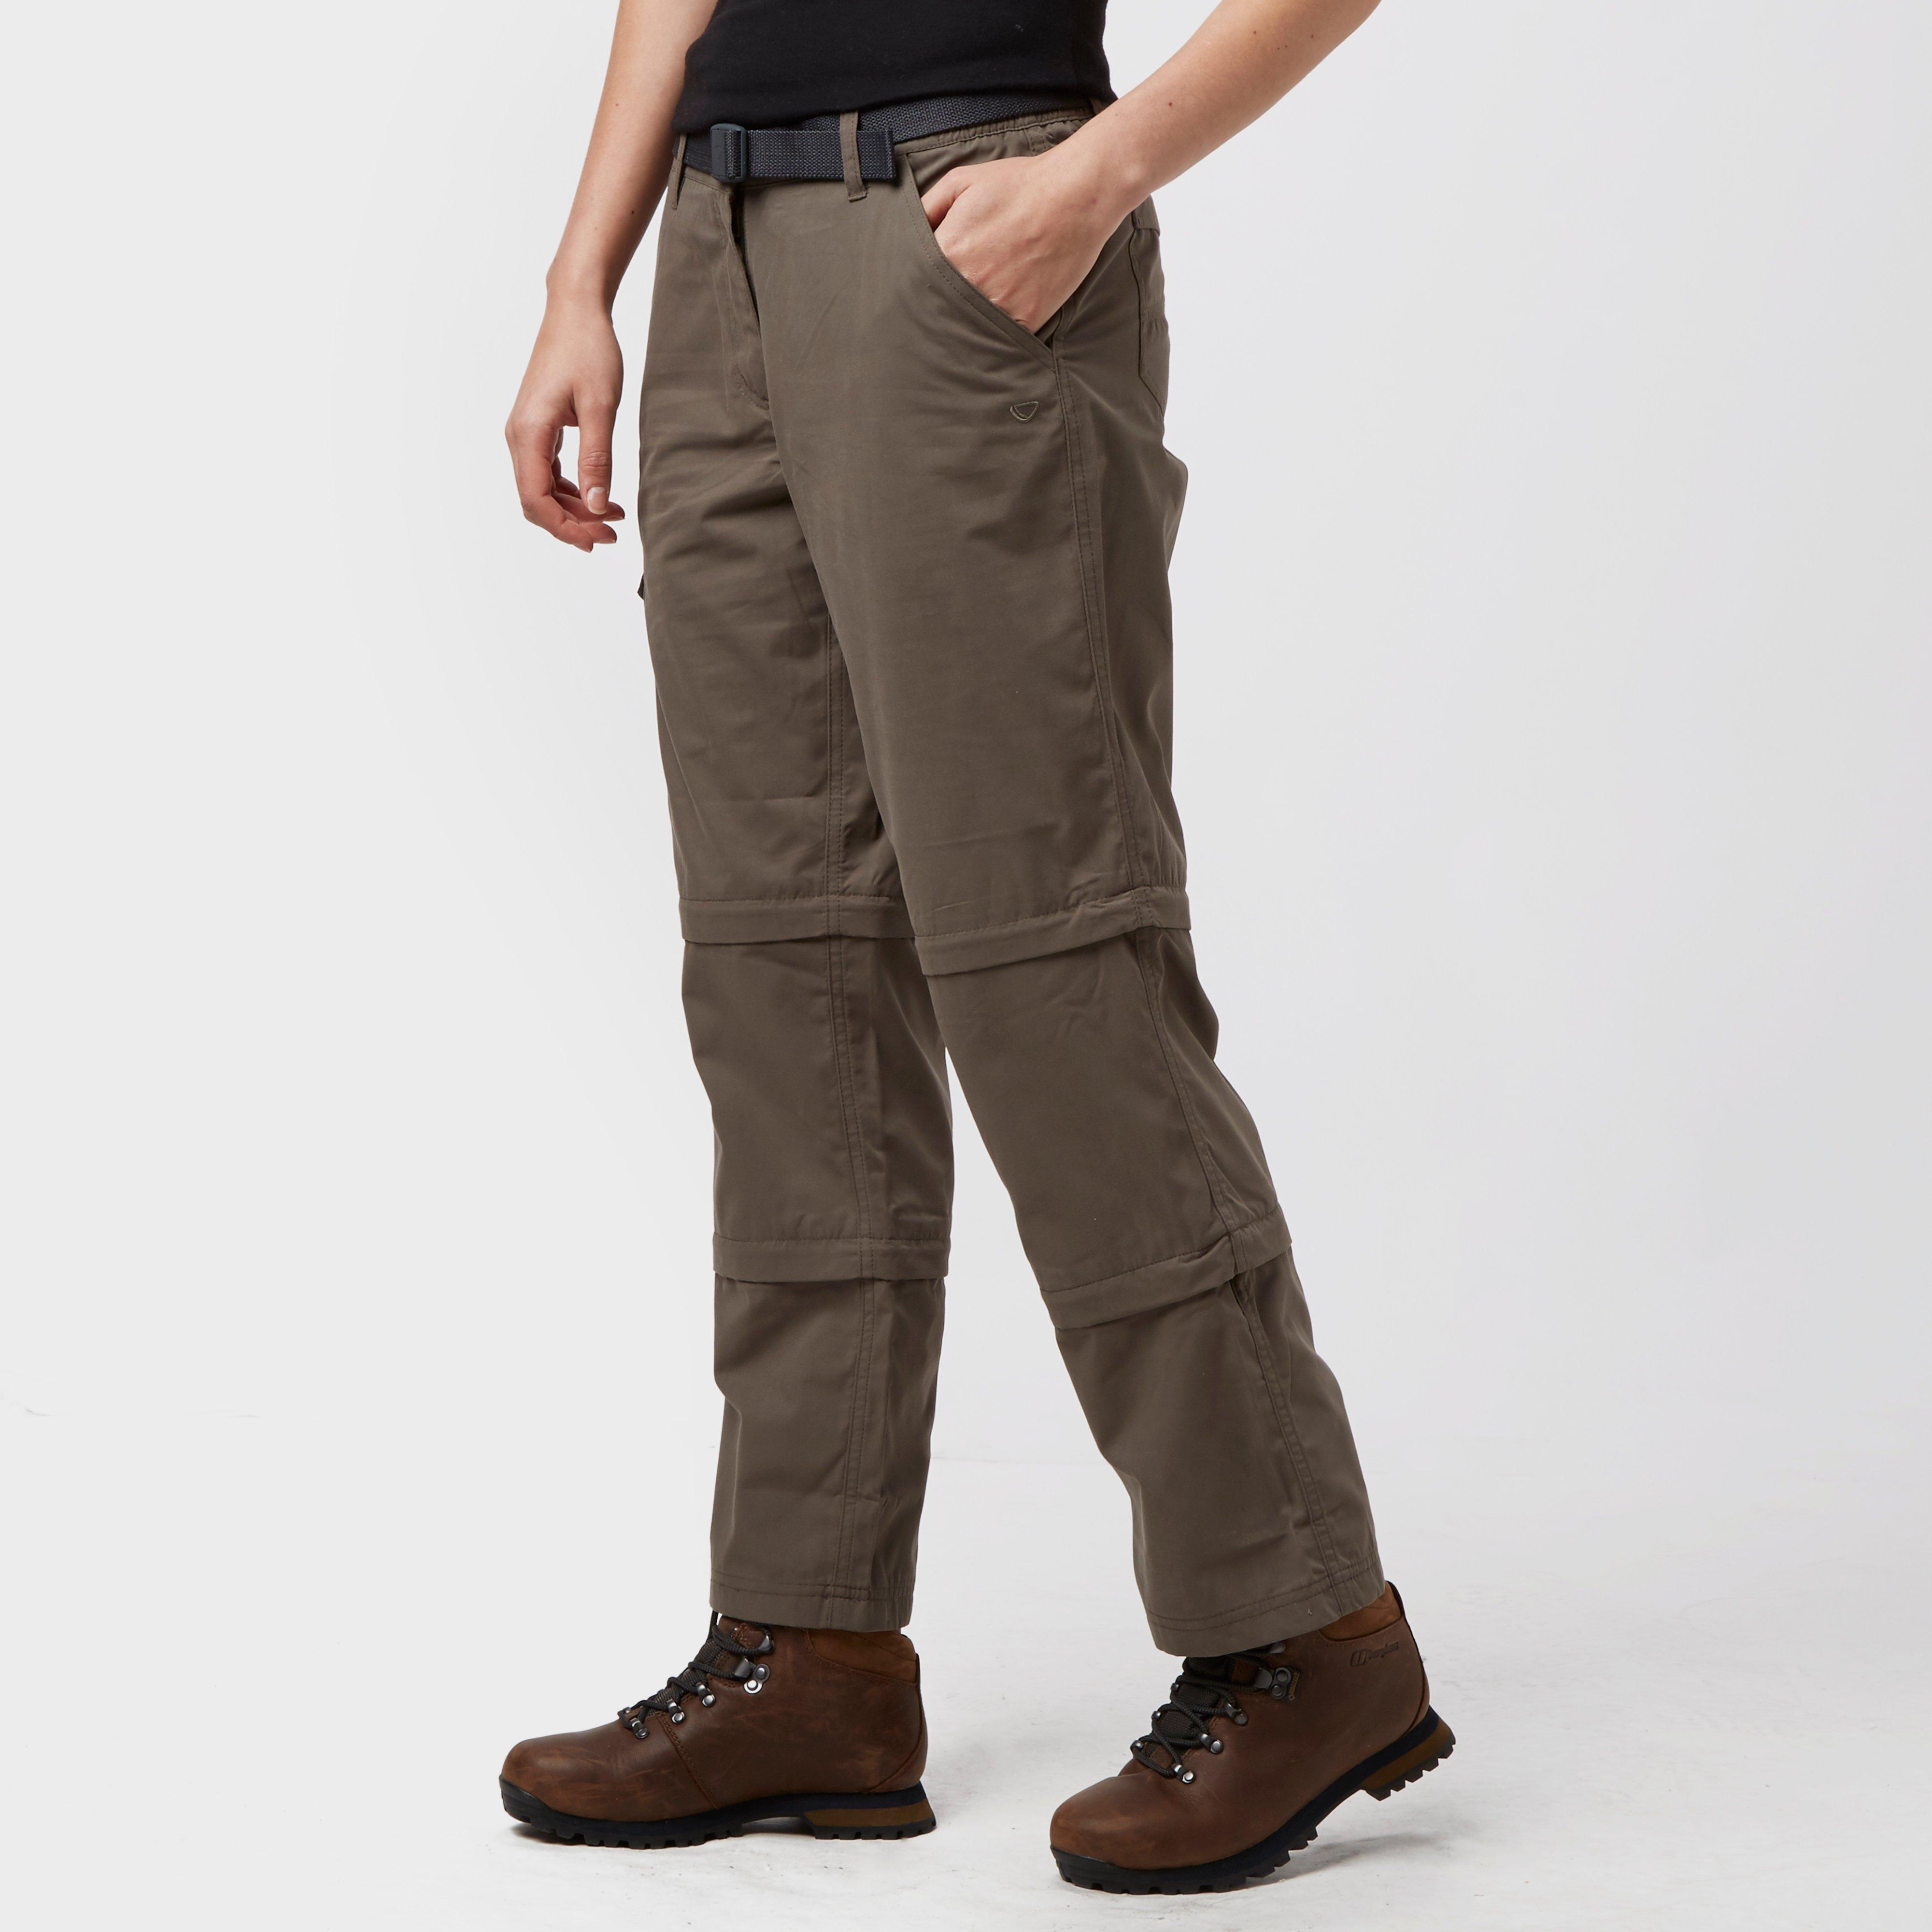 Brasher Women's Double Zip Off Trousers - Brown, Brown Review ...